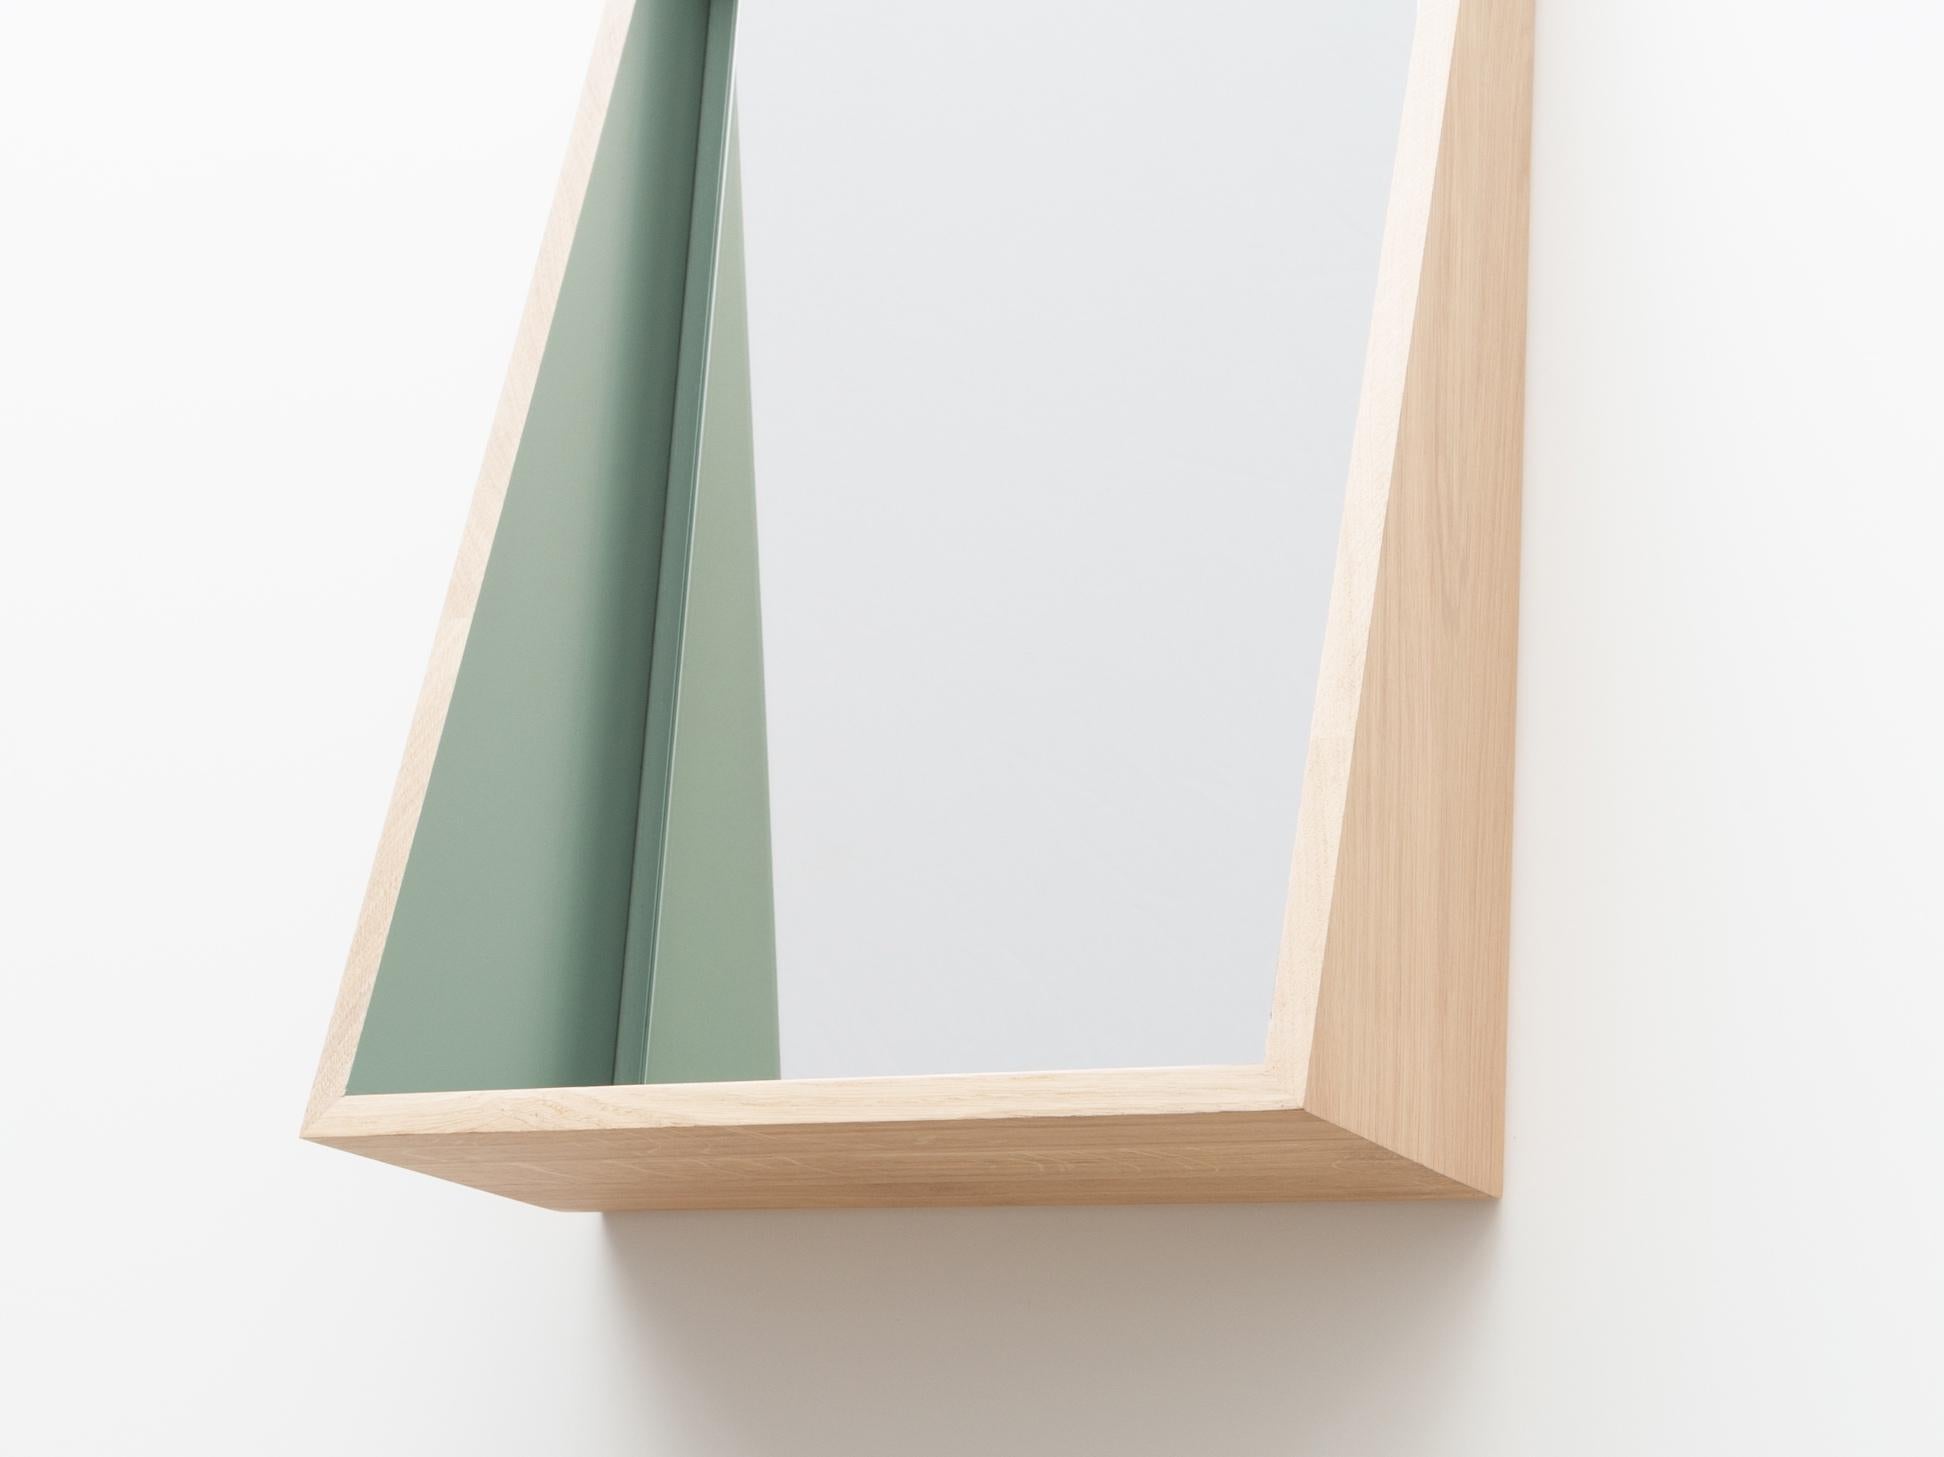 The float mirror gains a catch-all shelf, very practical to leave out keys, phone, change…
Frame in 100% solid oak from sustainable French forest. Made in Anjou (France).